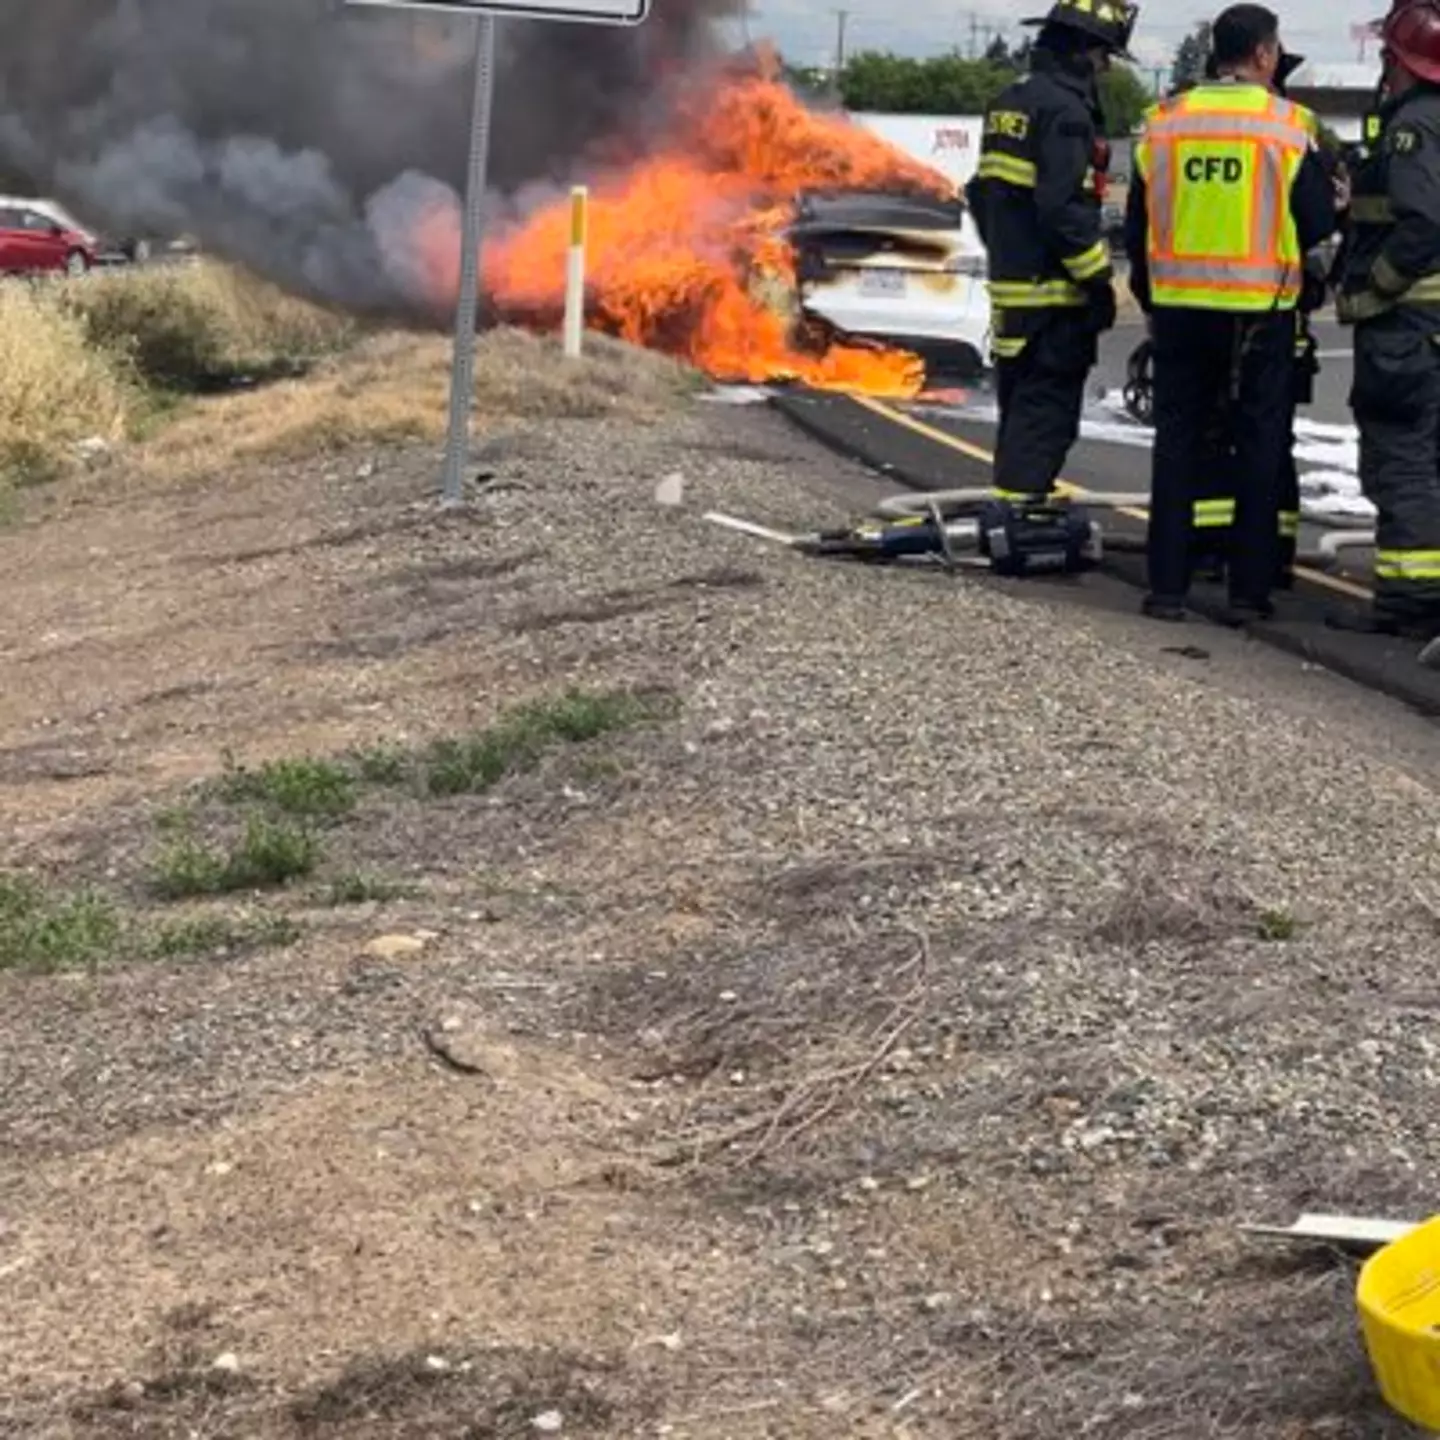 The car caught fire after the driver noticed it shaking from under him.